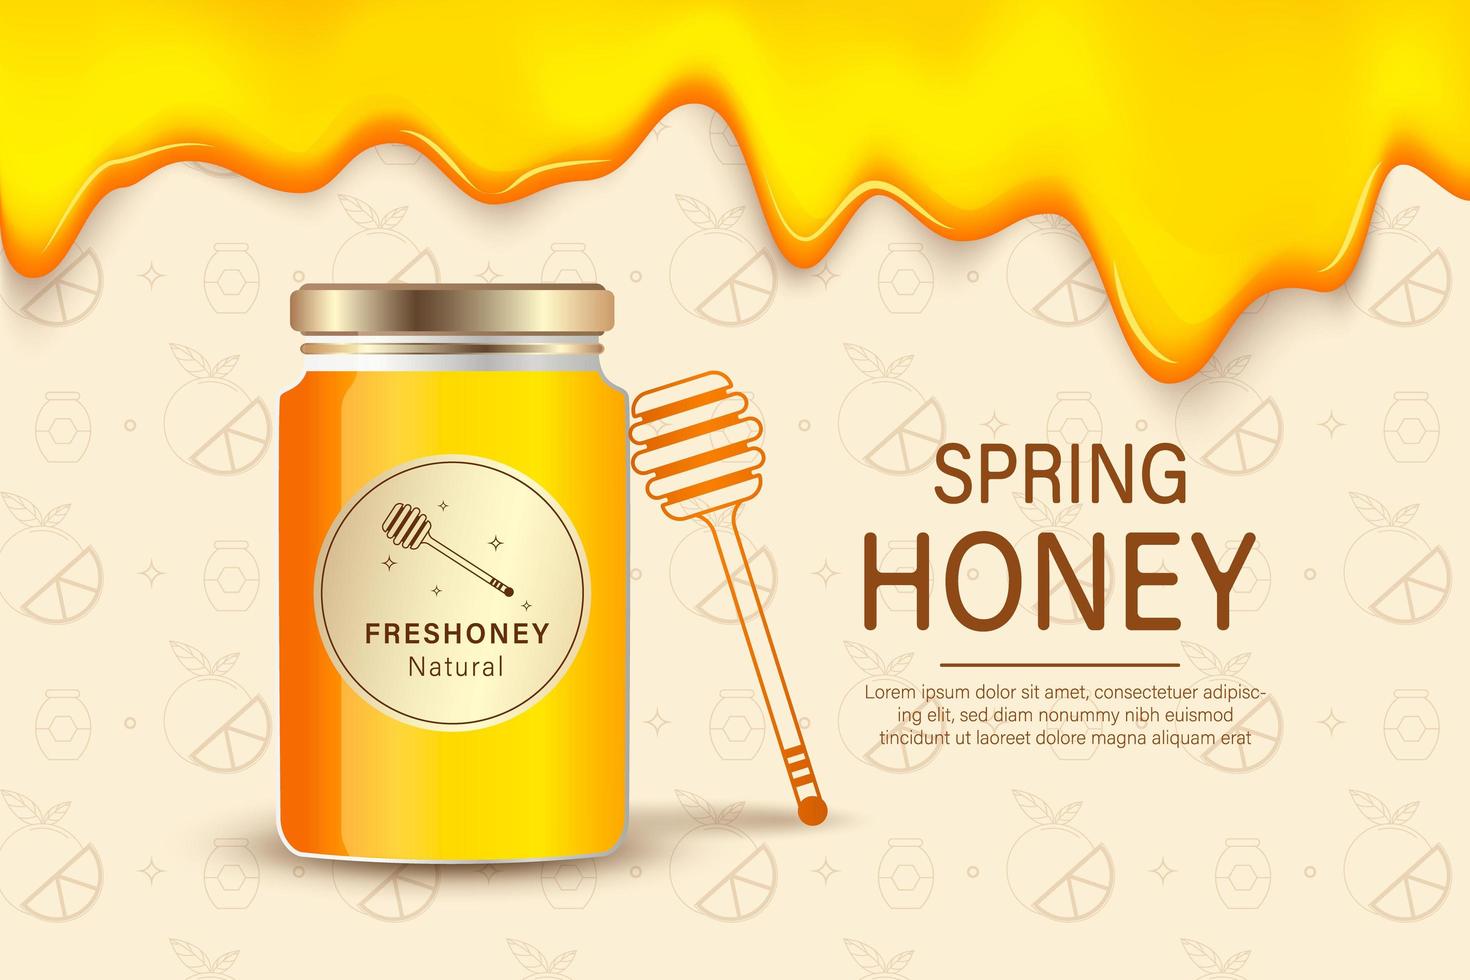 Farm honey. Ad placard template with realistic honey, healthy organic food farm products packaging background. Farm honey, food sweet organic, beekeeping natural illustration vector